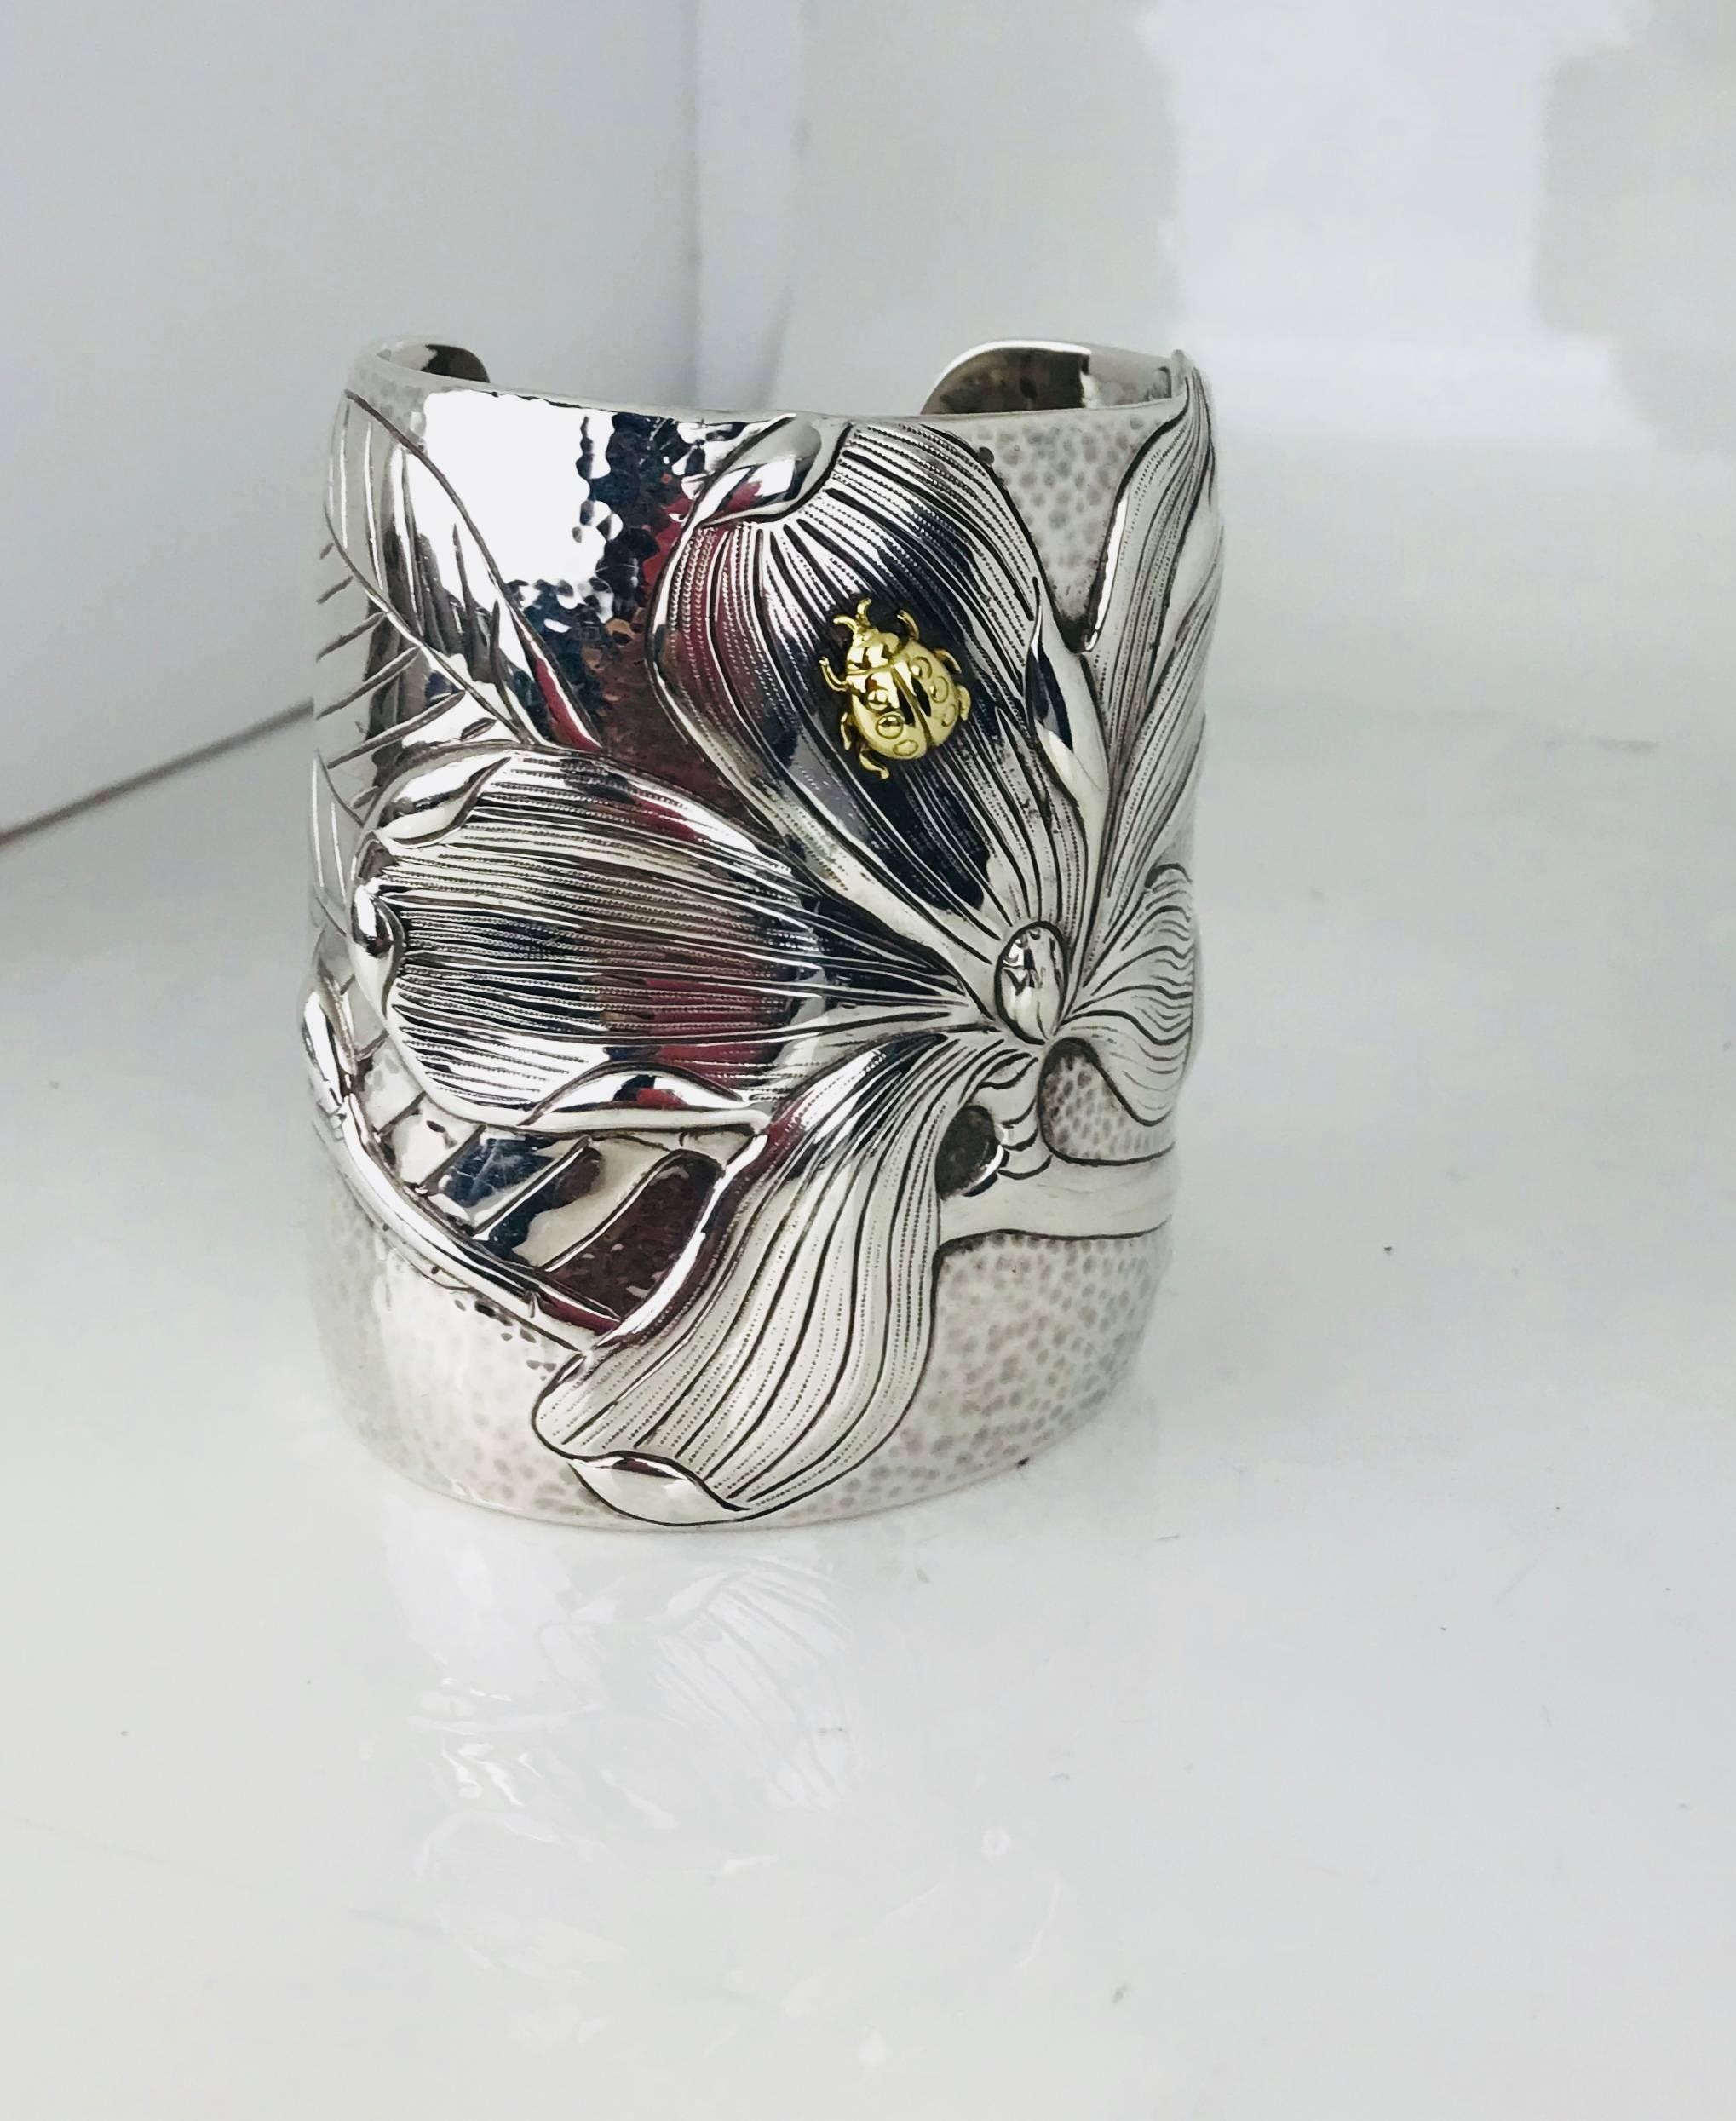 2001 Tiffany & Co. 925 750 Hand Hammered Magnolia Lady Bug Cuff Bracelet
Vintage, Retired, & Extremely Rare

Sterling Silver Repousse with Applied 18k Lady Bug.

Heavy Repousse Magnolia Flower with Deeply Veined Leaves Plus a Single Yellow Gold Lady